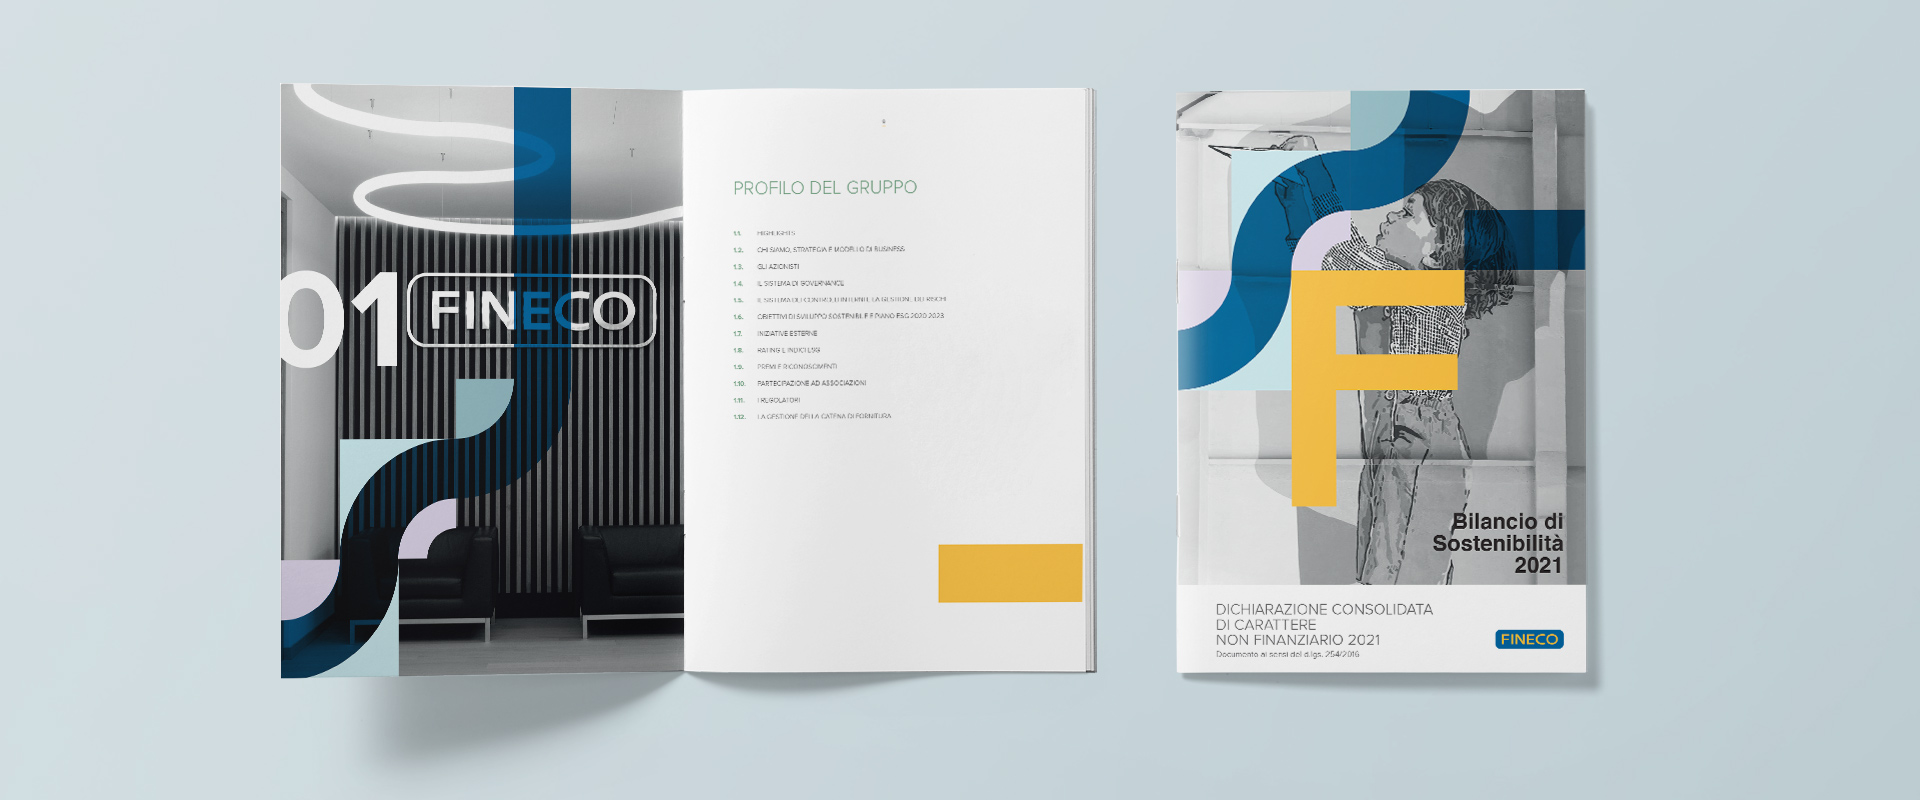 ATC - All Things Communicate graphic restyling of the Fineco Group's 2019 Sustainability report